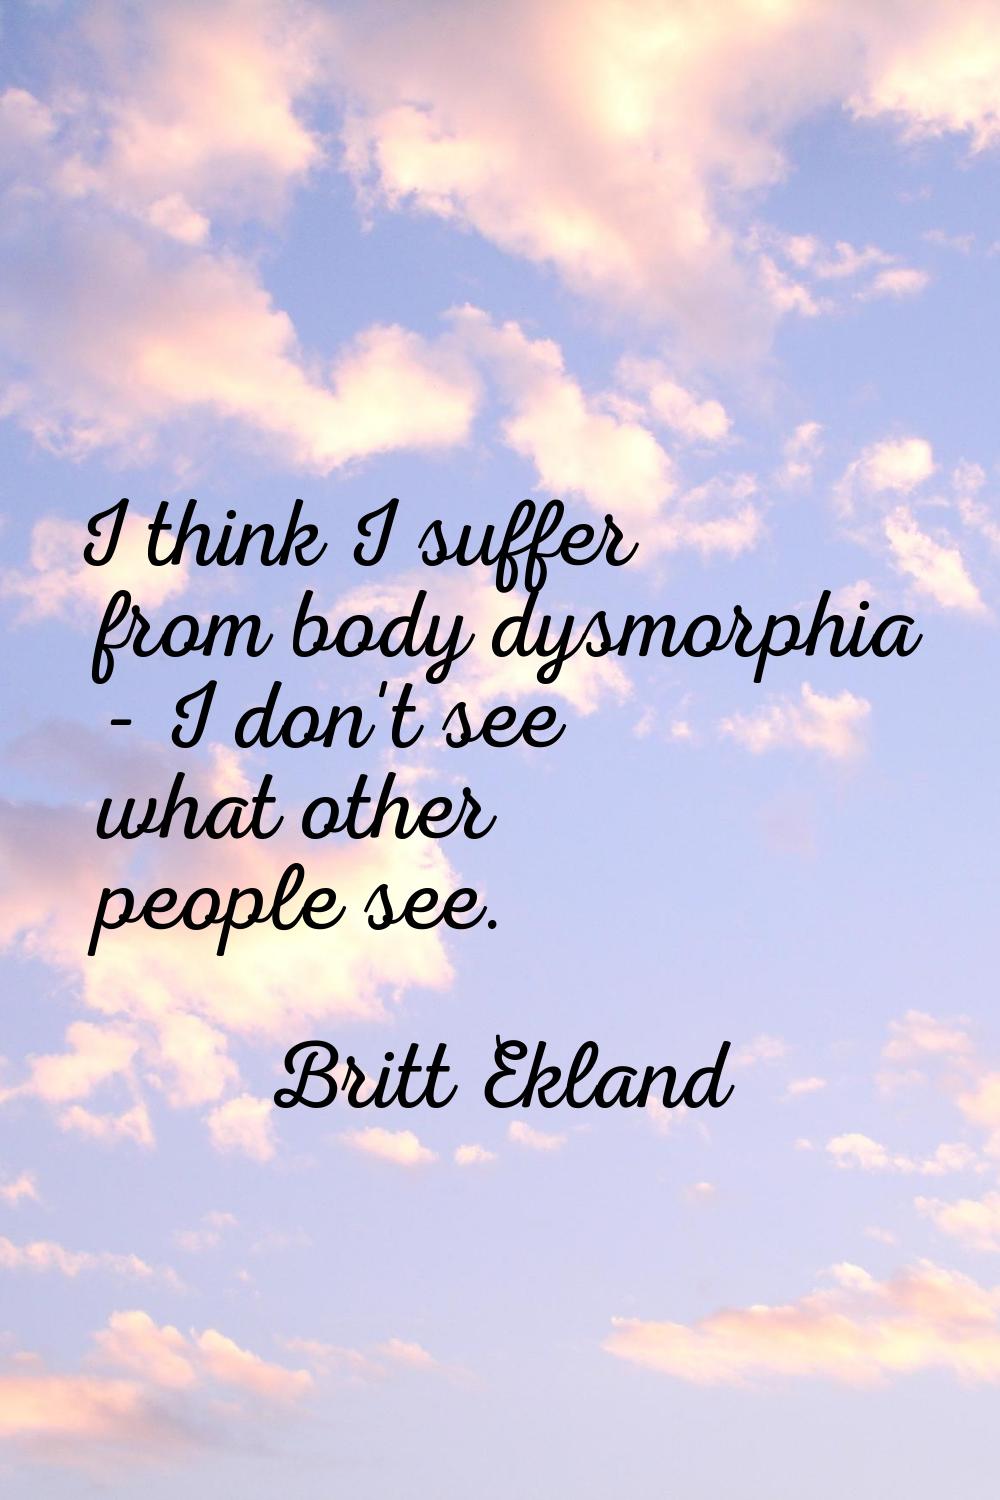 I think I suffer from body dysmorphia - I don't see what other people see.